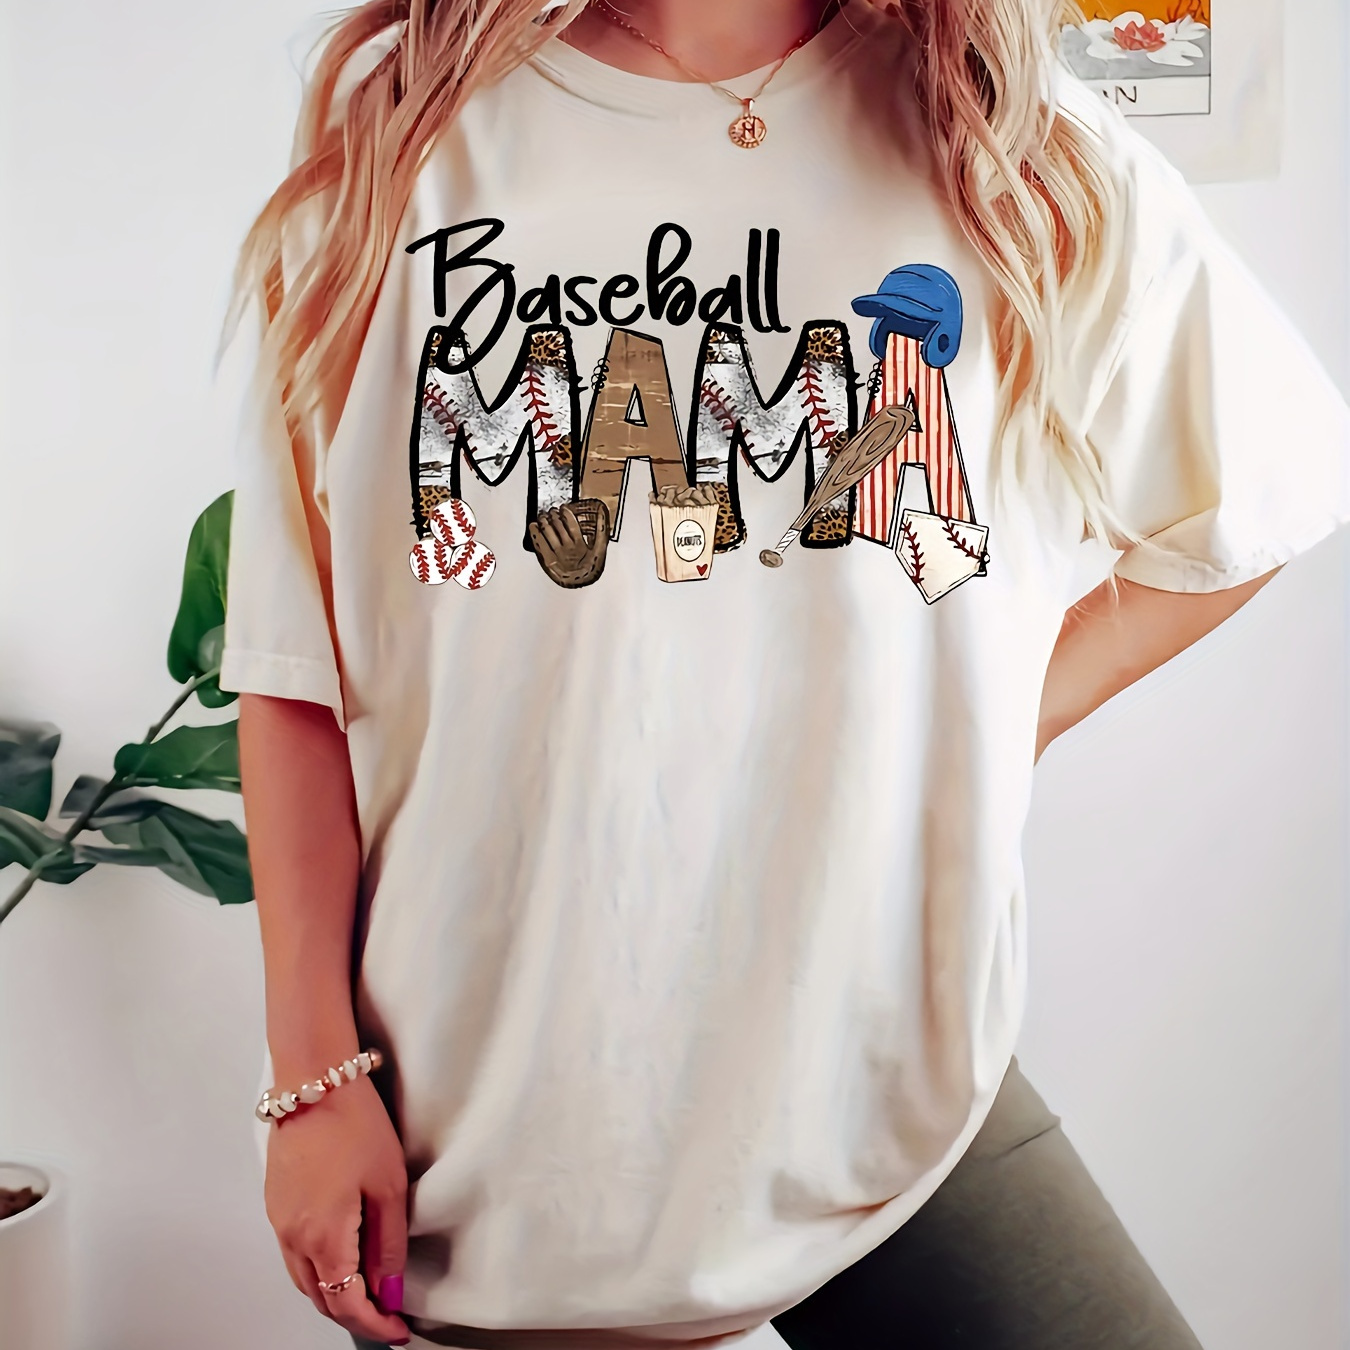 

Baseball Mama Print T-shirt, Casual Crew Neck Short Sleeve Top For Spring & Summer, Women's Clothing